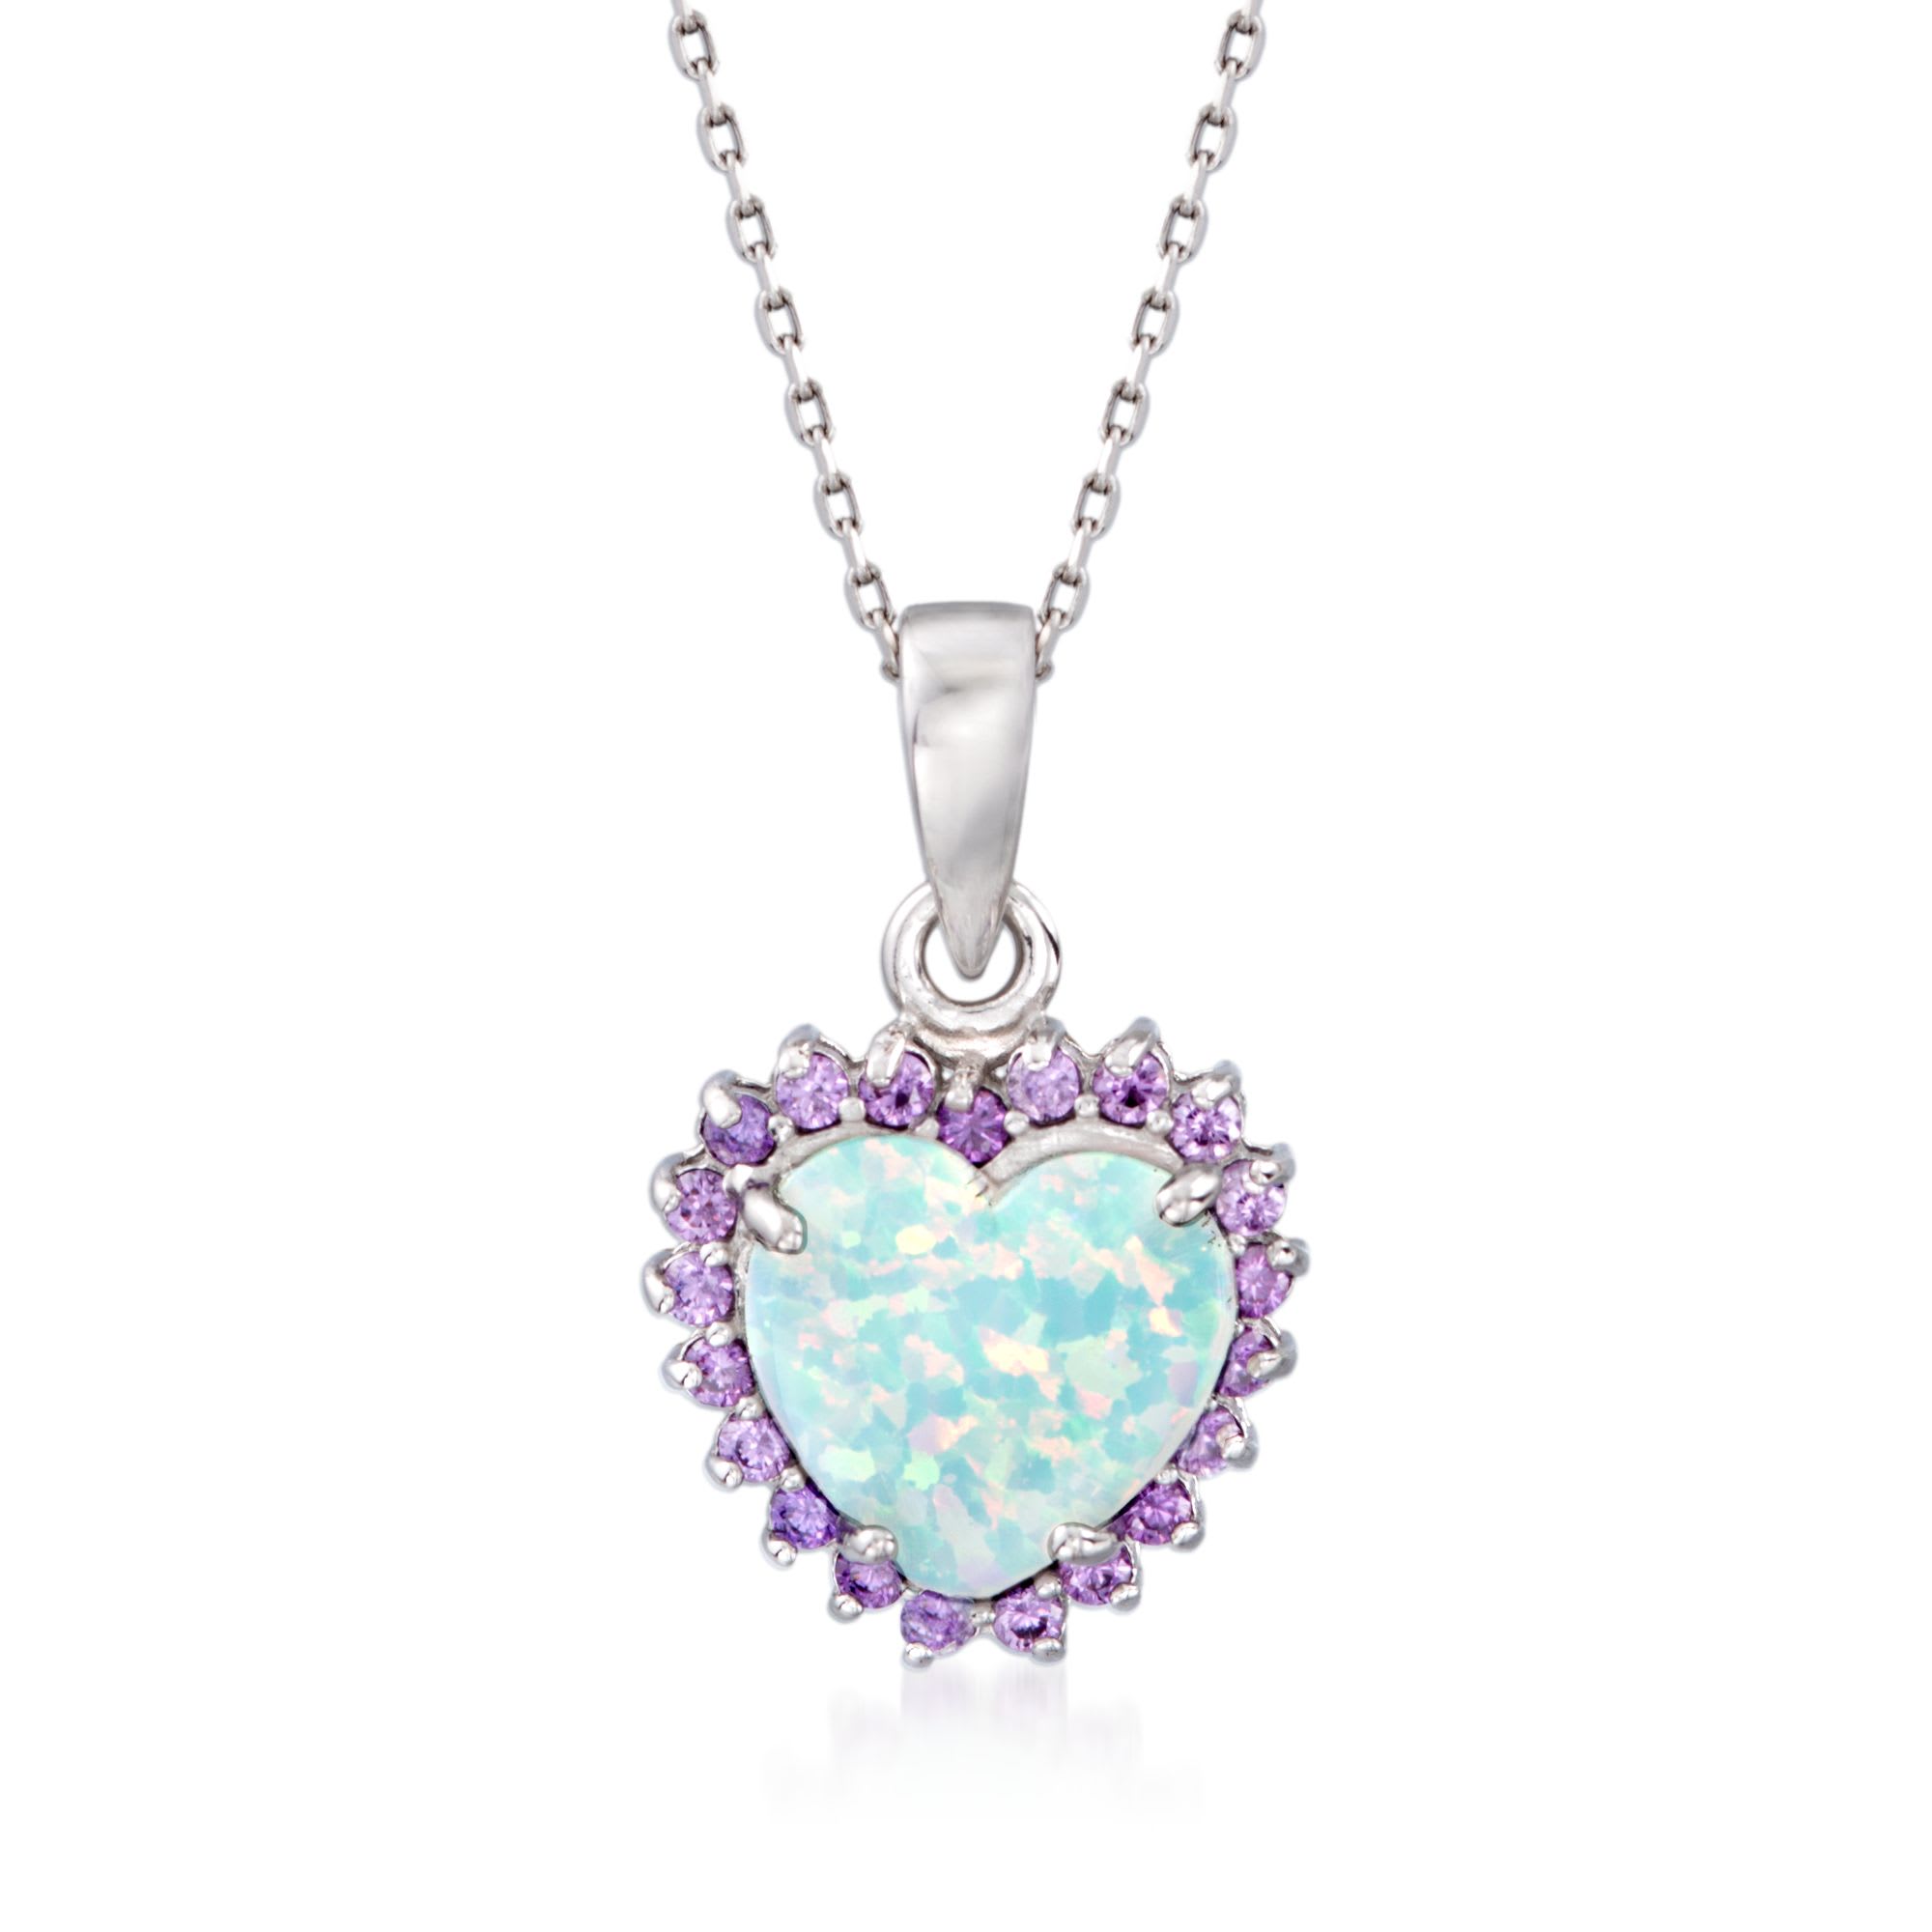 Simulated Opal and Simulated Amethyst Heart Pendant Necklace in ...